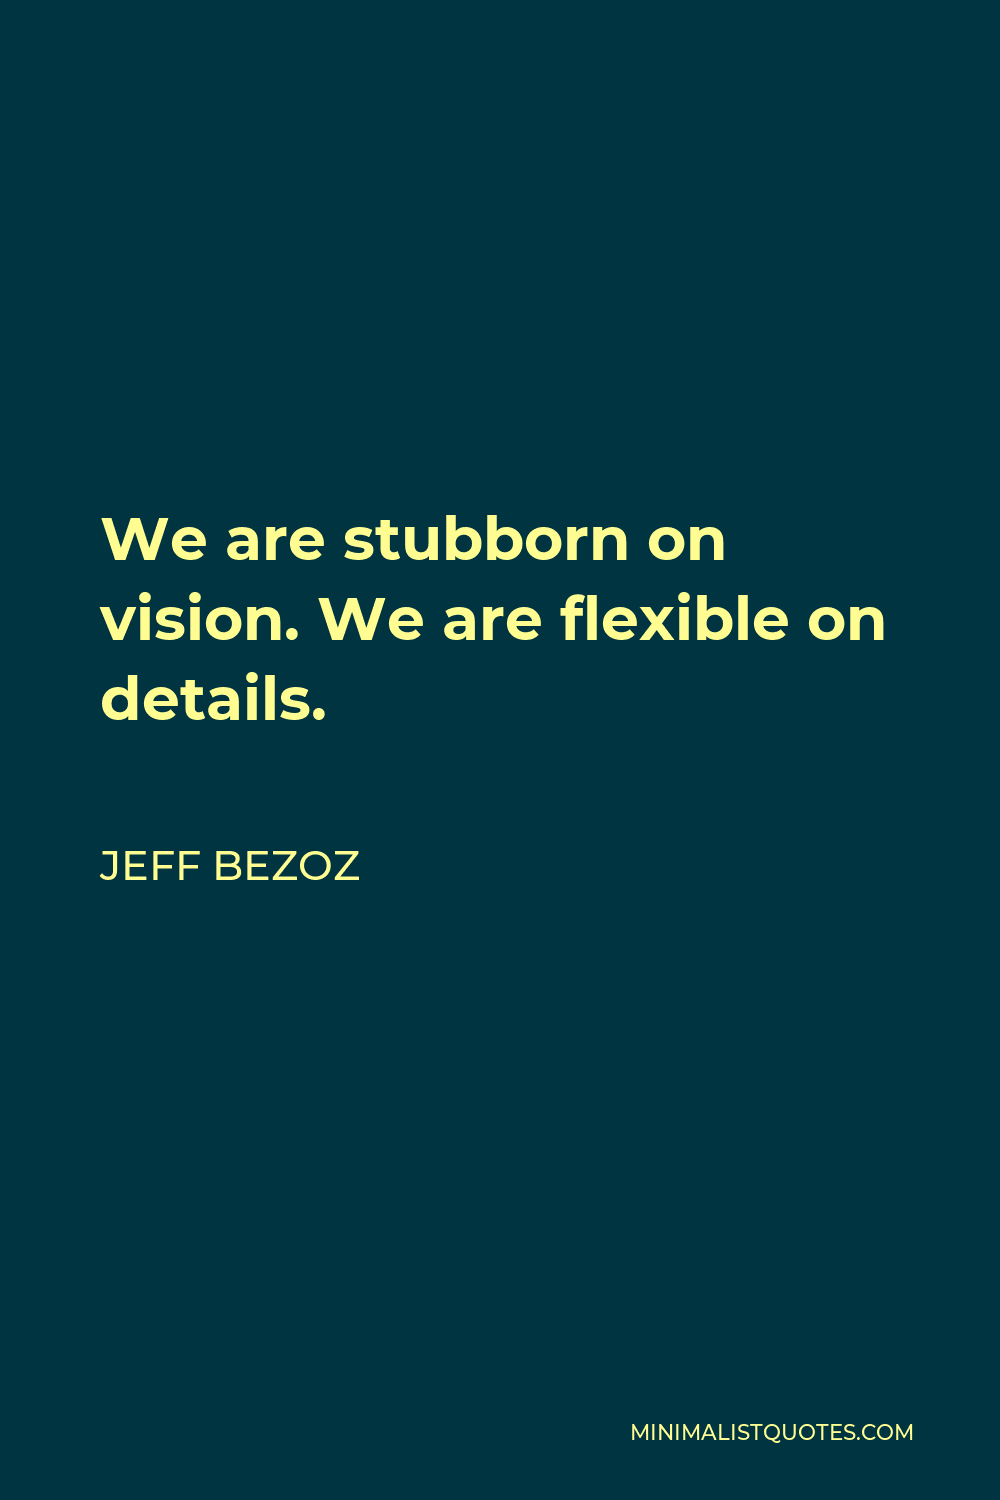 Jeff Bezoz Quote - We are stubborn on vision. We are flexible on details.